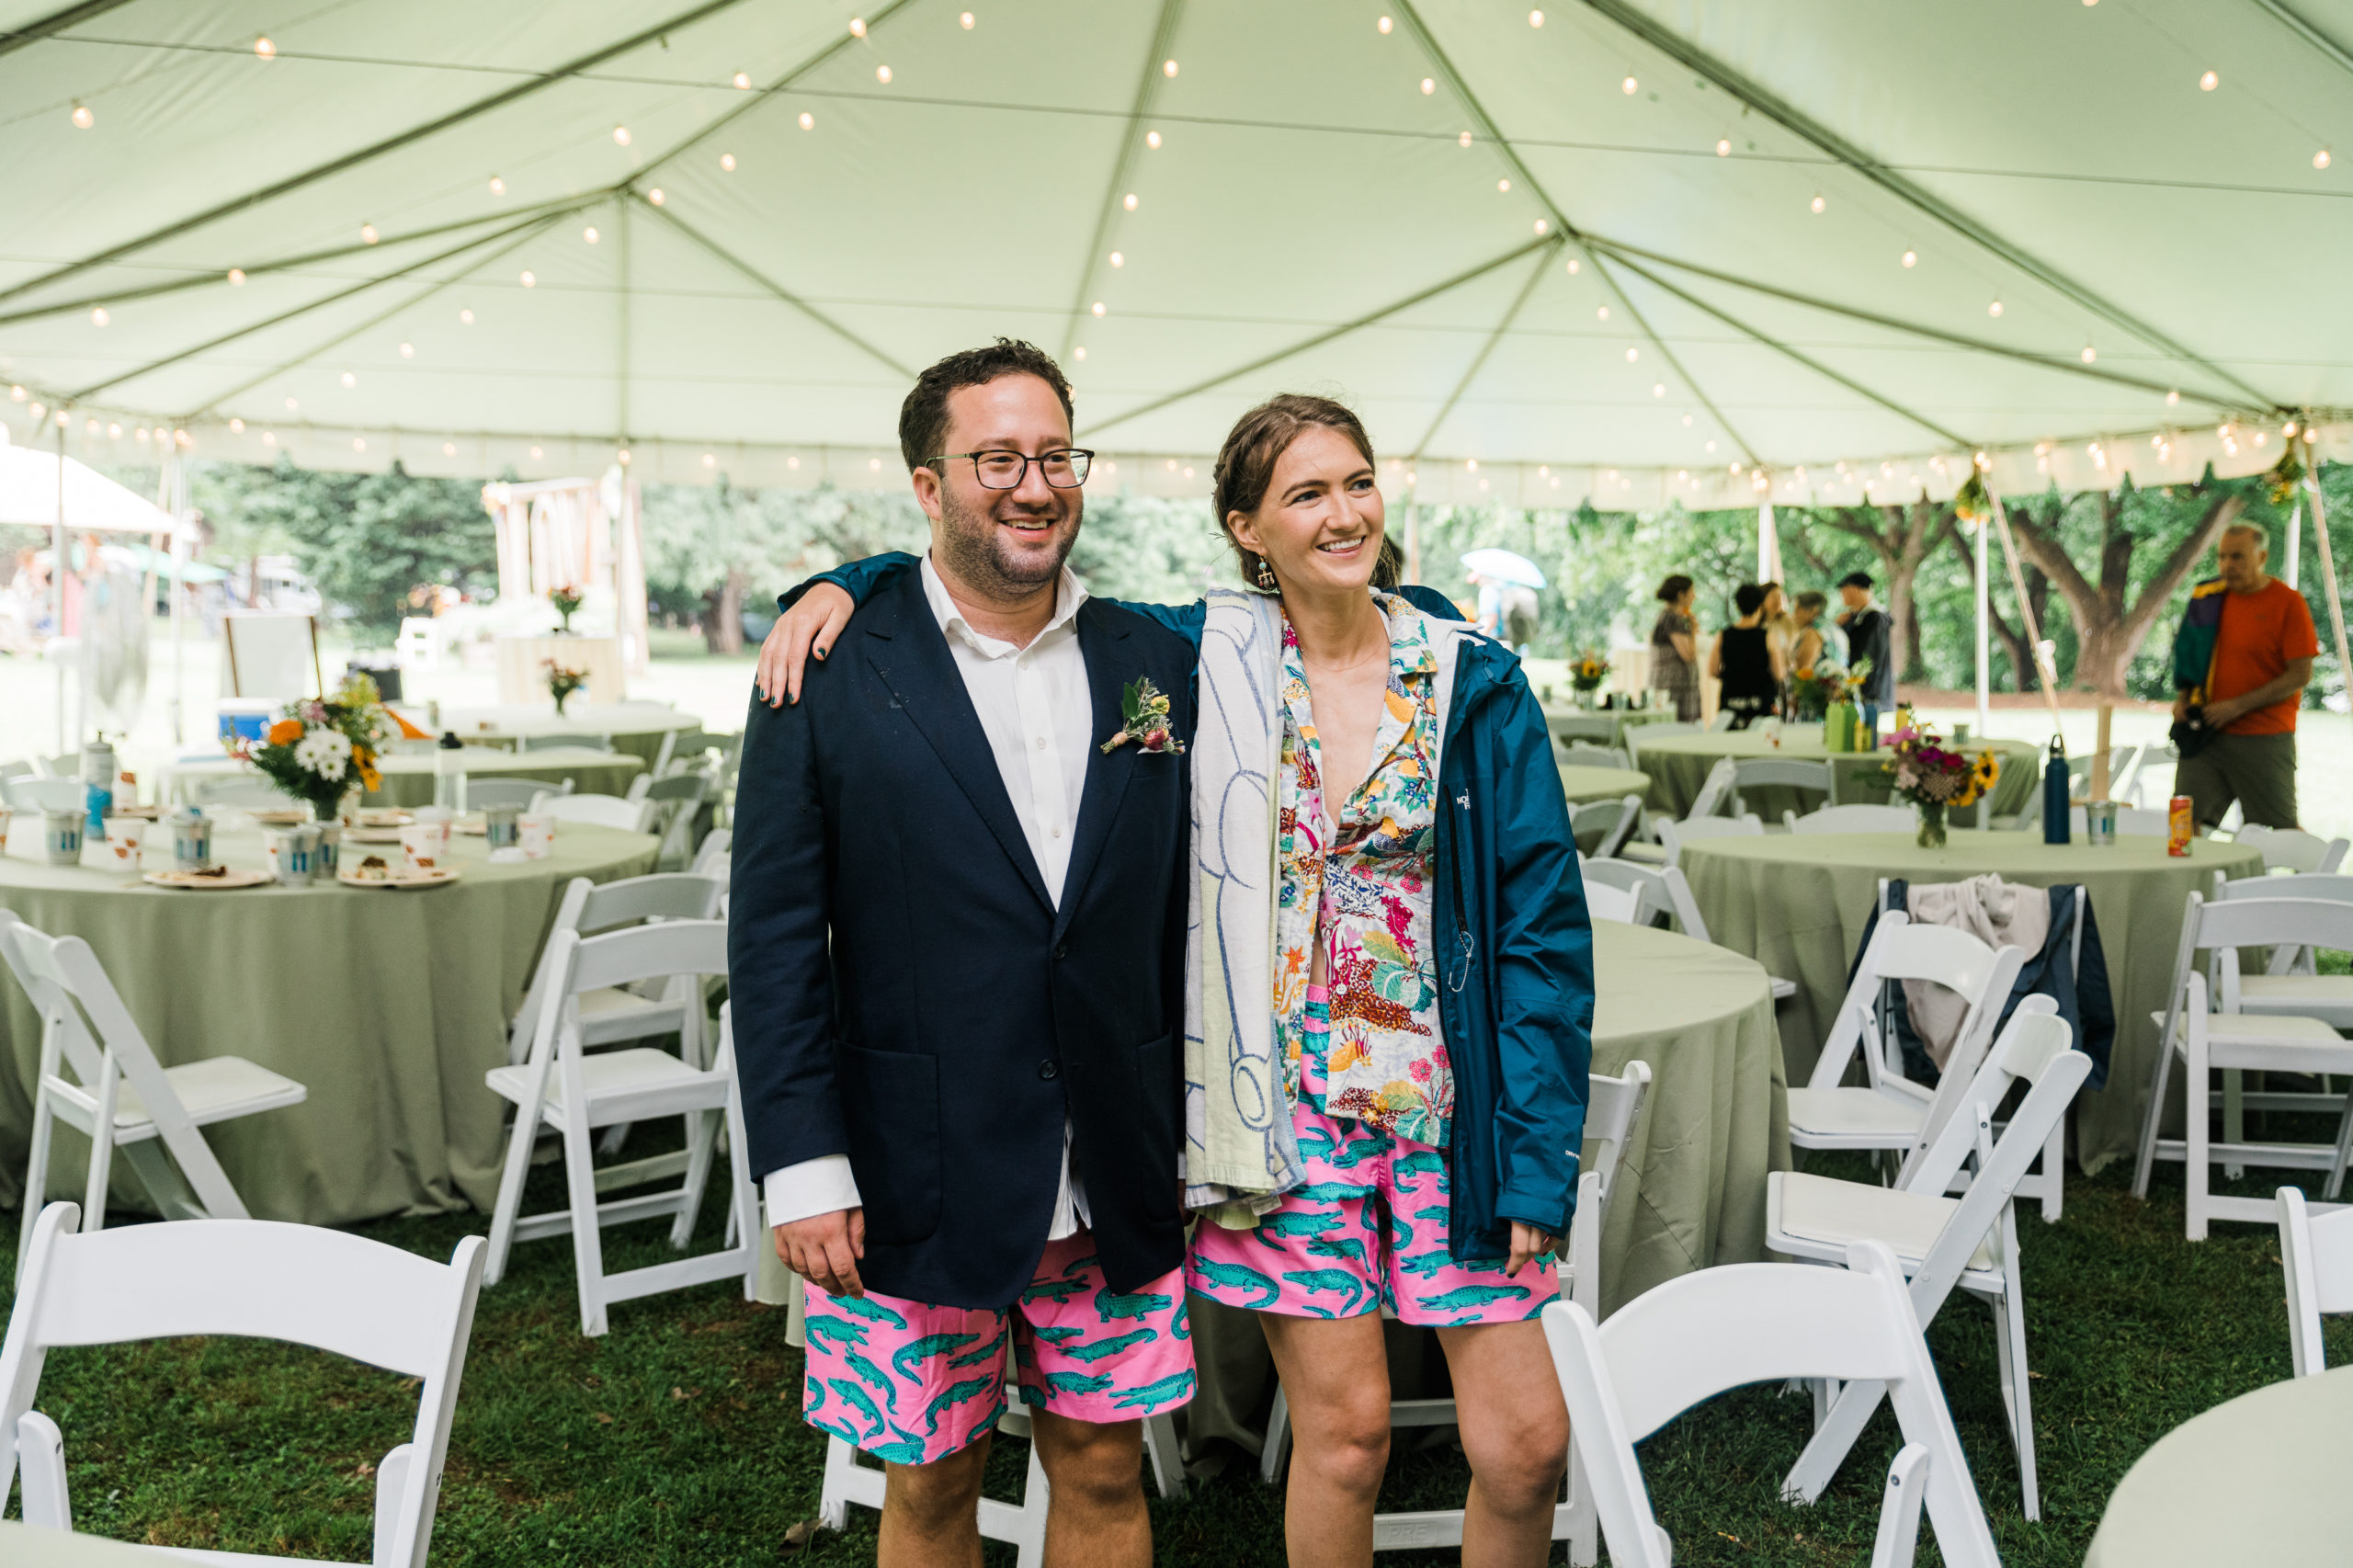 The bride and groom wearing shorts and raincoats 